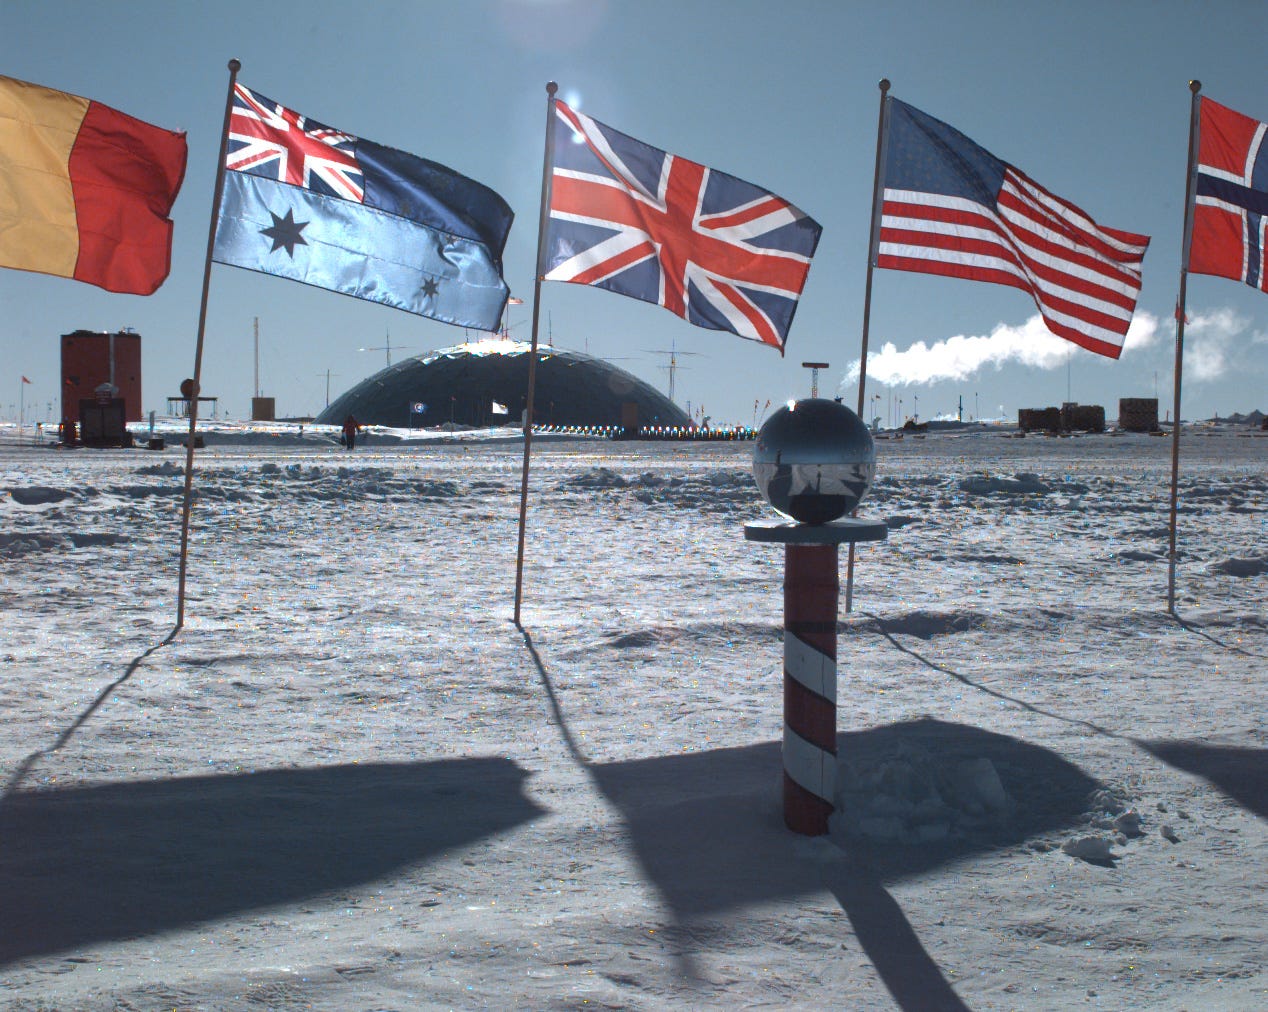 A photo taken in Antartica, with a blue partly cloudy sky over bright icy ground. In the background is the shiny dome of Amundsen-Scott Station. In the foreground is a short pole, red-and-white striped, with a shiny sphere on top, representing the south pole. Several flags fly behind the pole, all in a line. The ones in frame include Belgium, Australia, the UK, the US, and Norway.